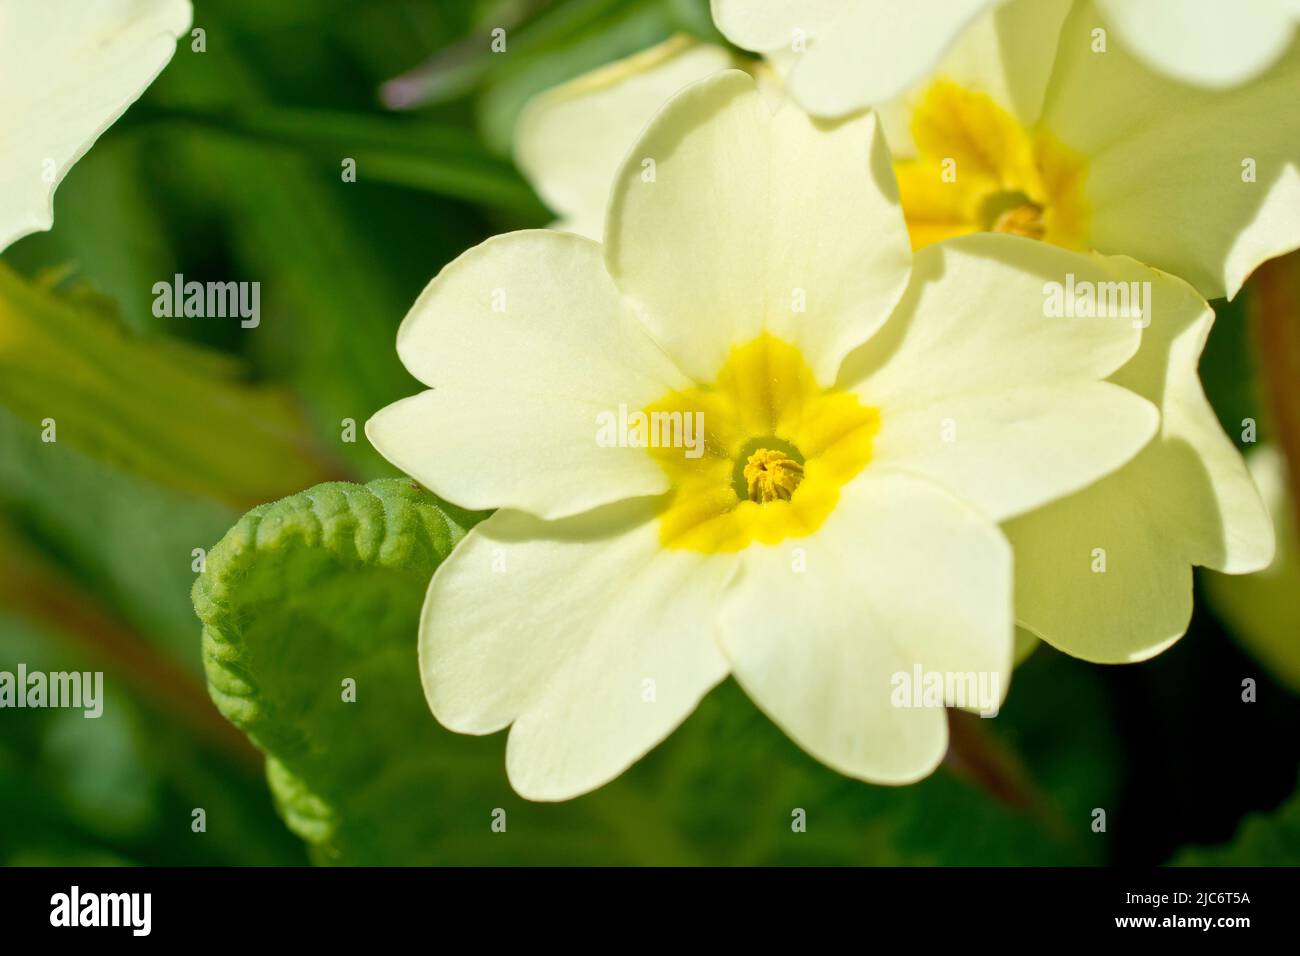 Primrose (primula vulgaris), close up focusing on a single thrum-eyed flower out of many. Stock Photo